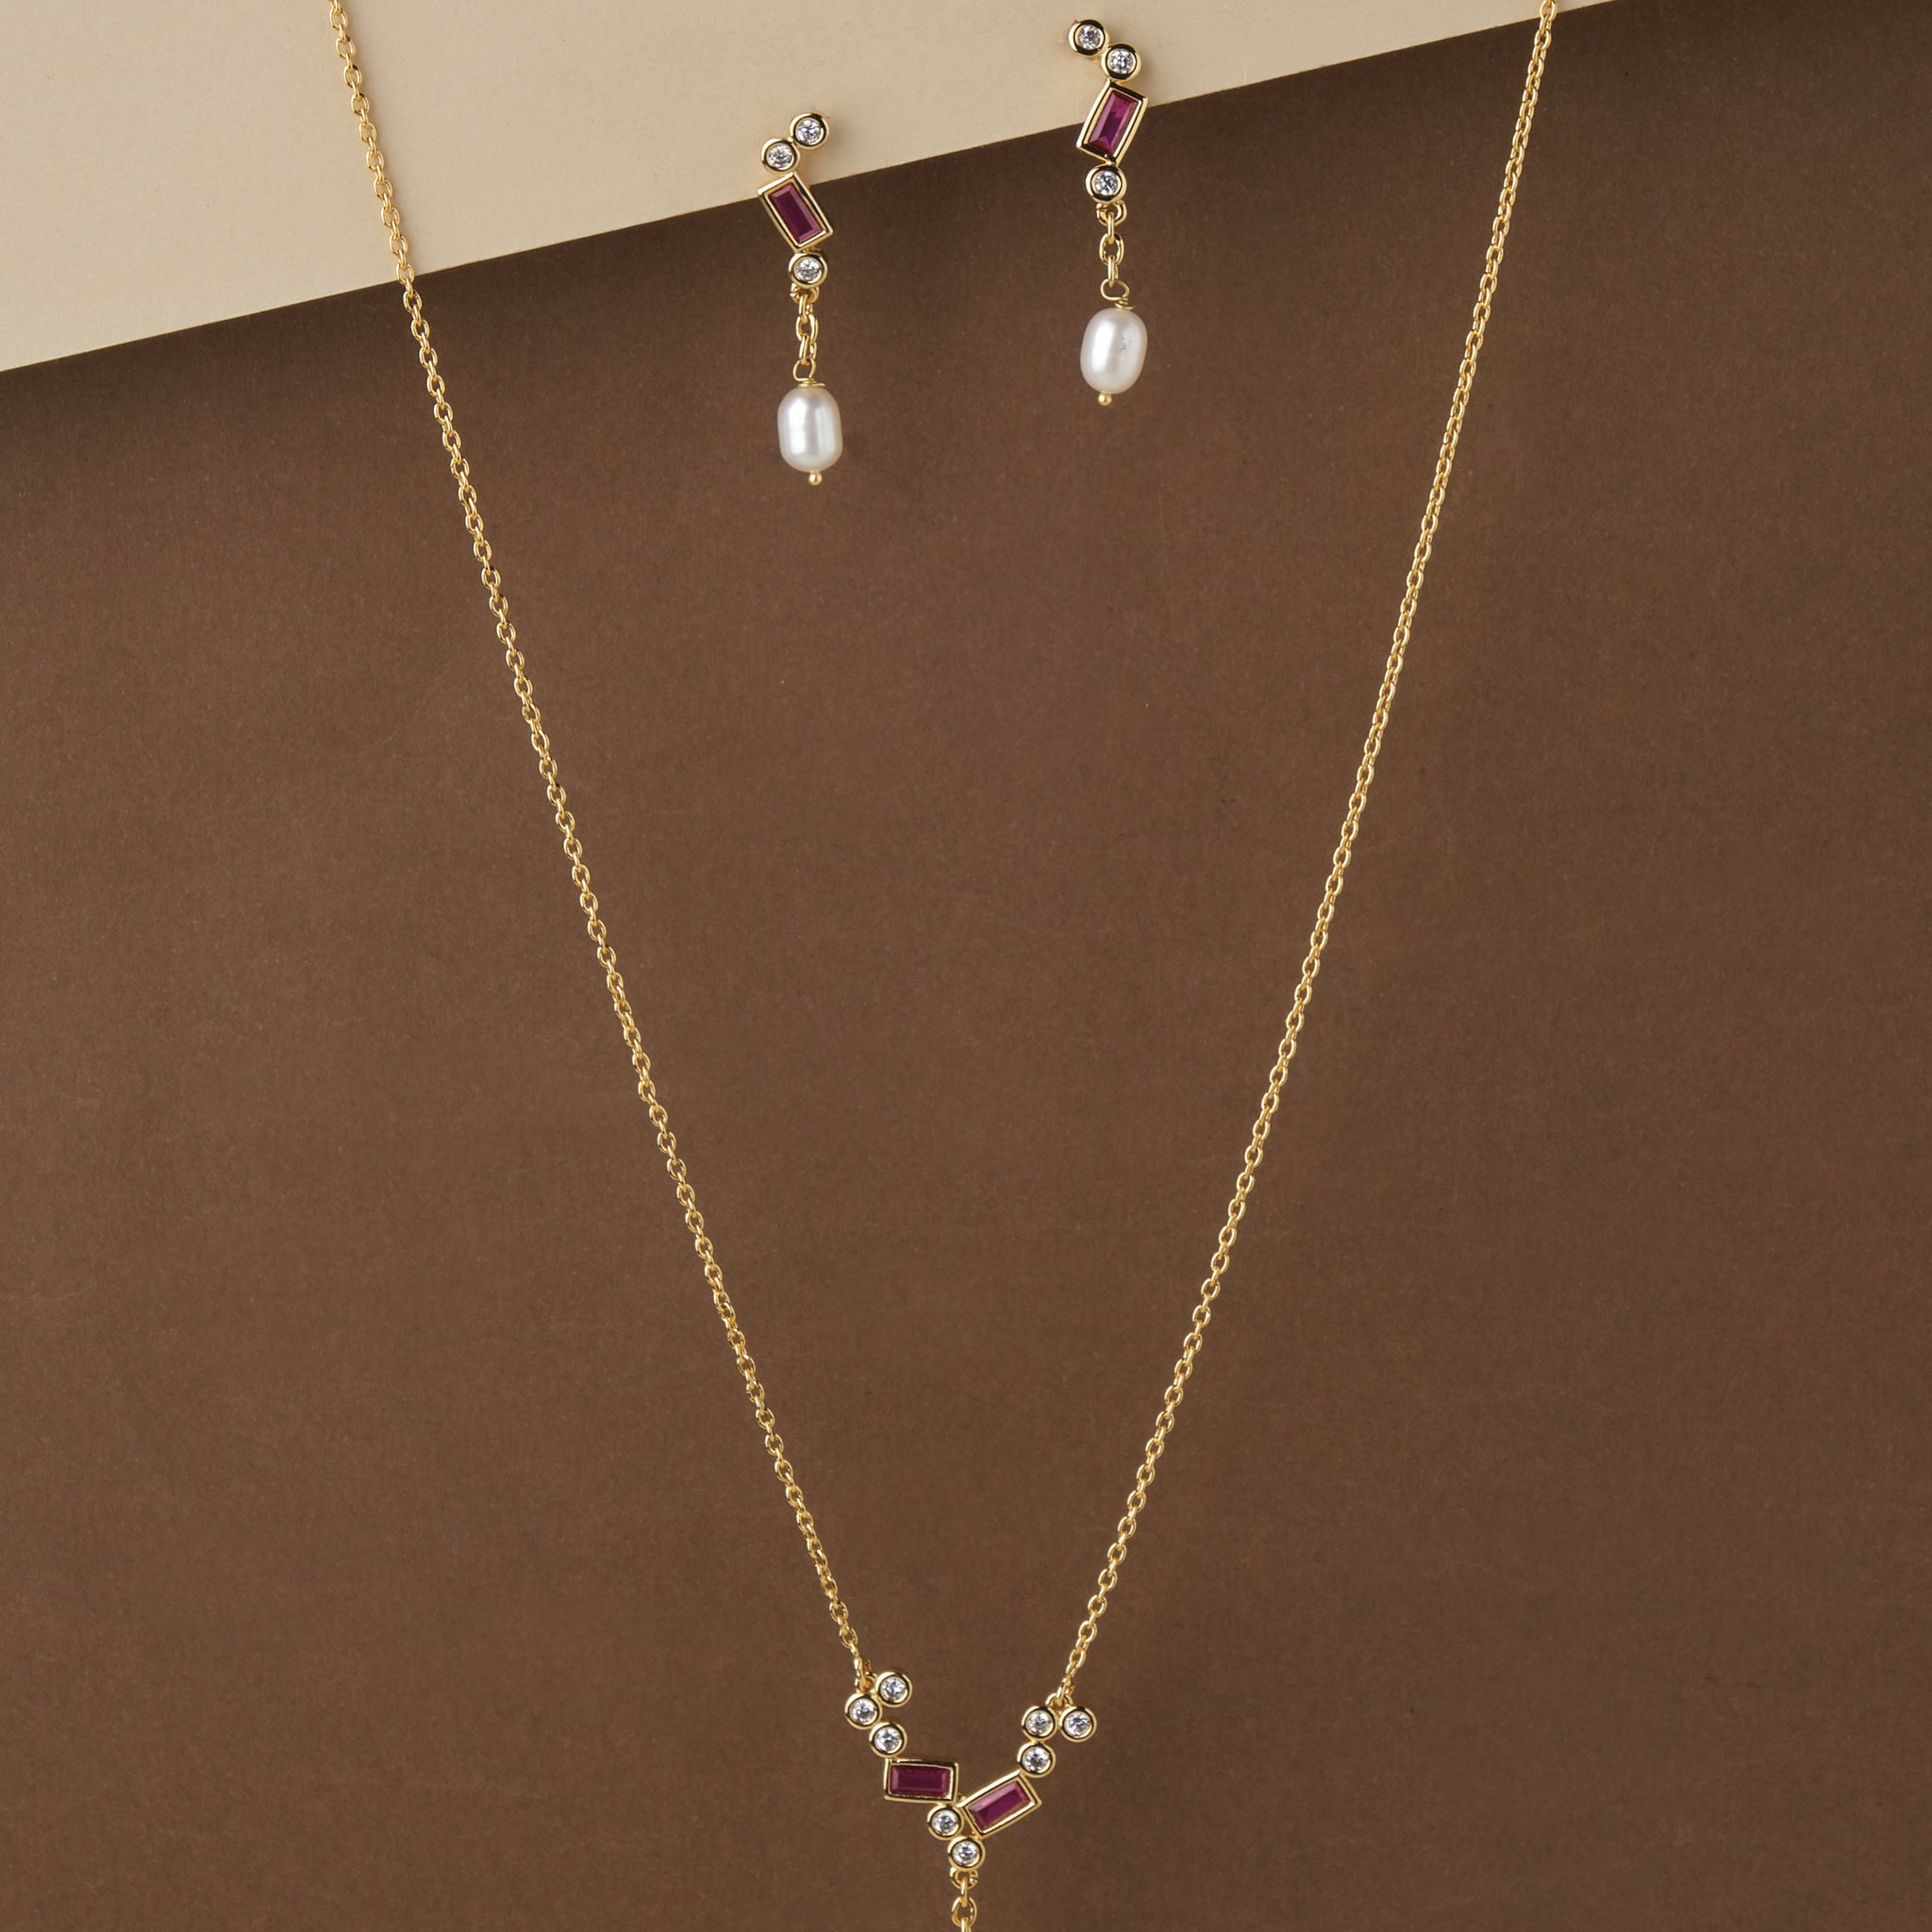 Chic and Slender Pearl Drop Necklace Set